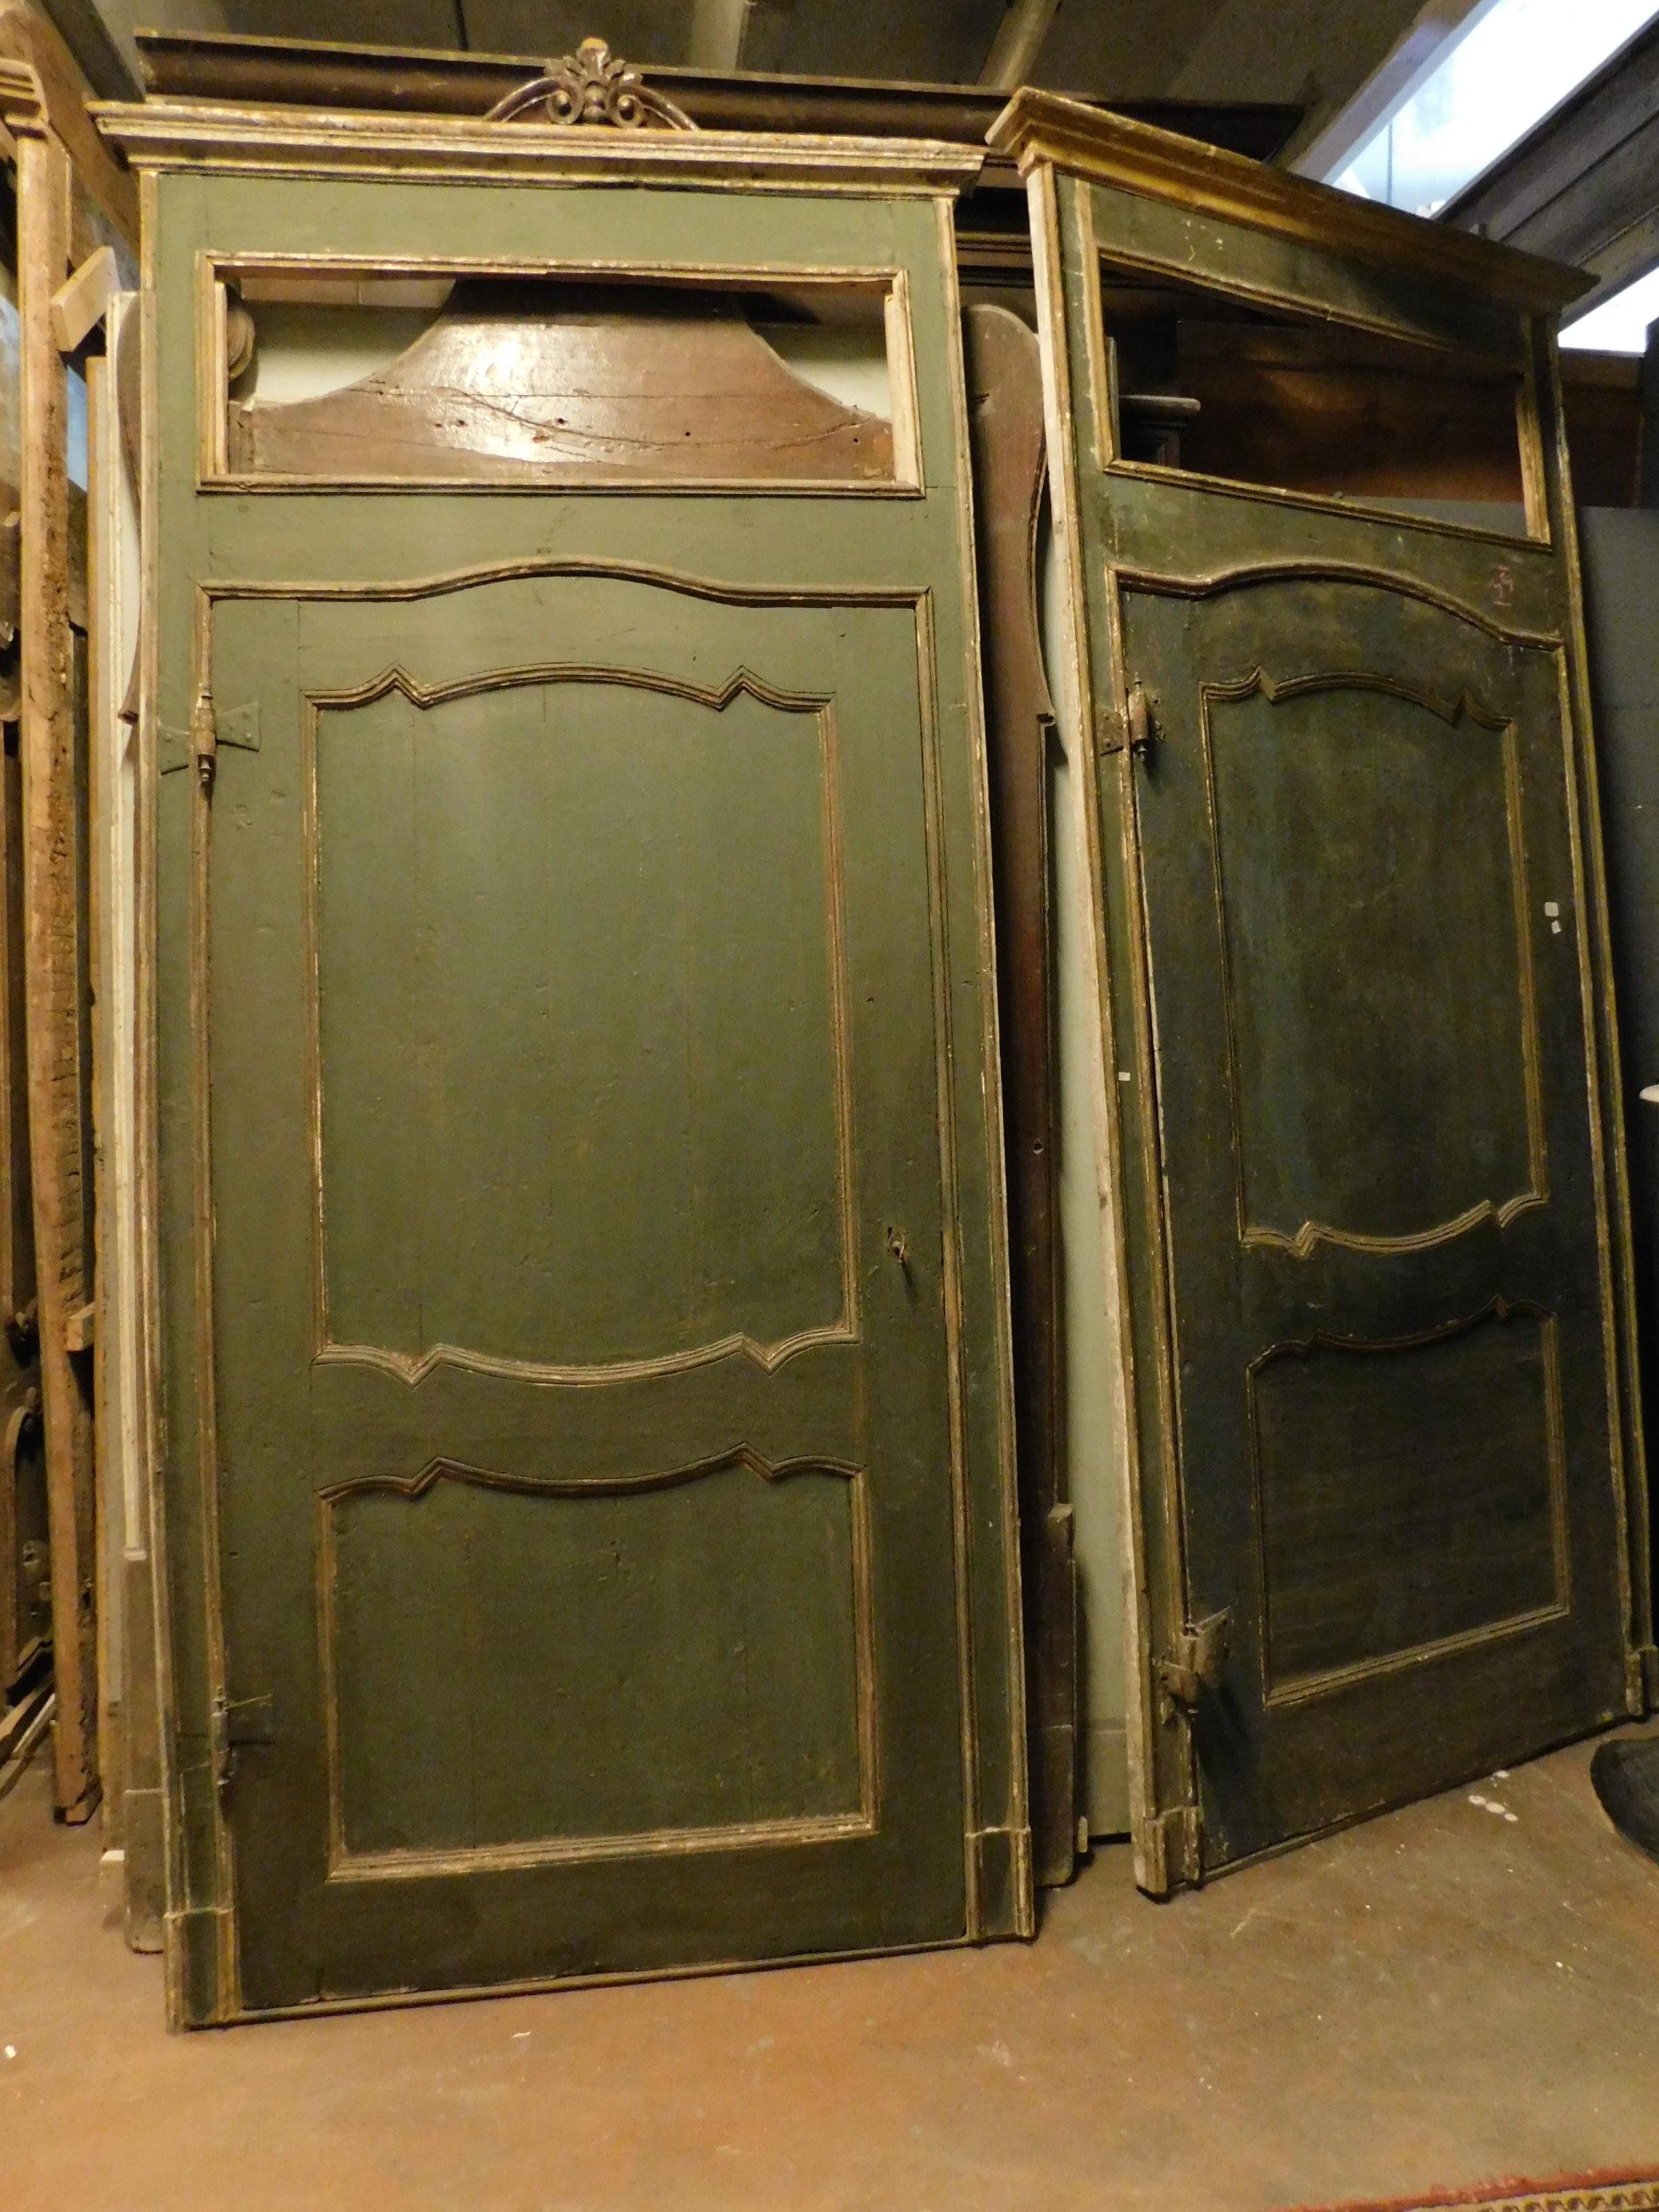 Set of 4 antique doors with high frame, hand-lacquered green background and thin yellow molure, space for canvas or panel above the door, all built for the same noble house of the early 18th century, in northern Italy.
Perfect as a set in an